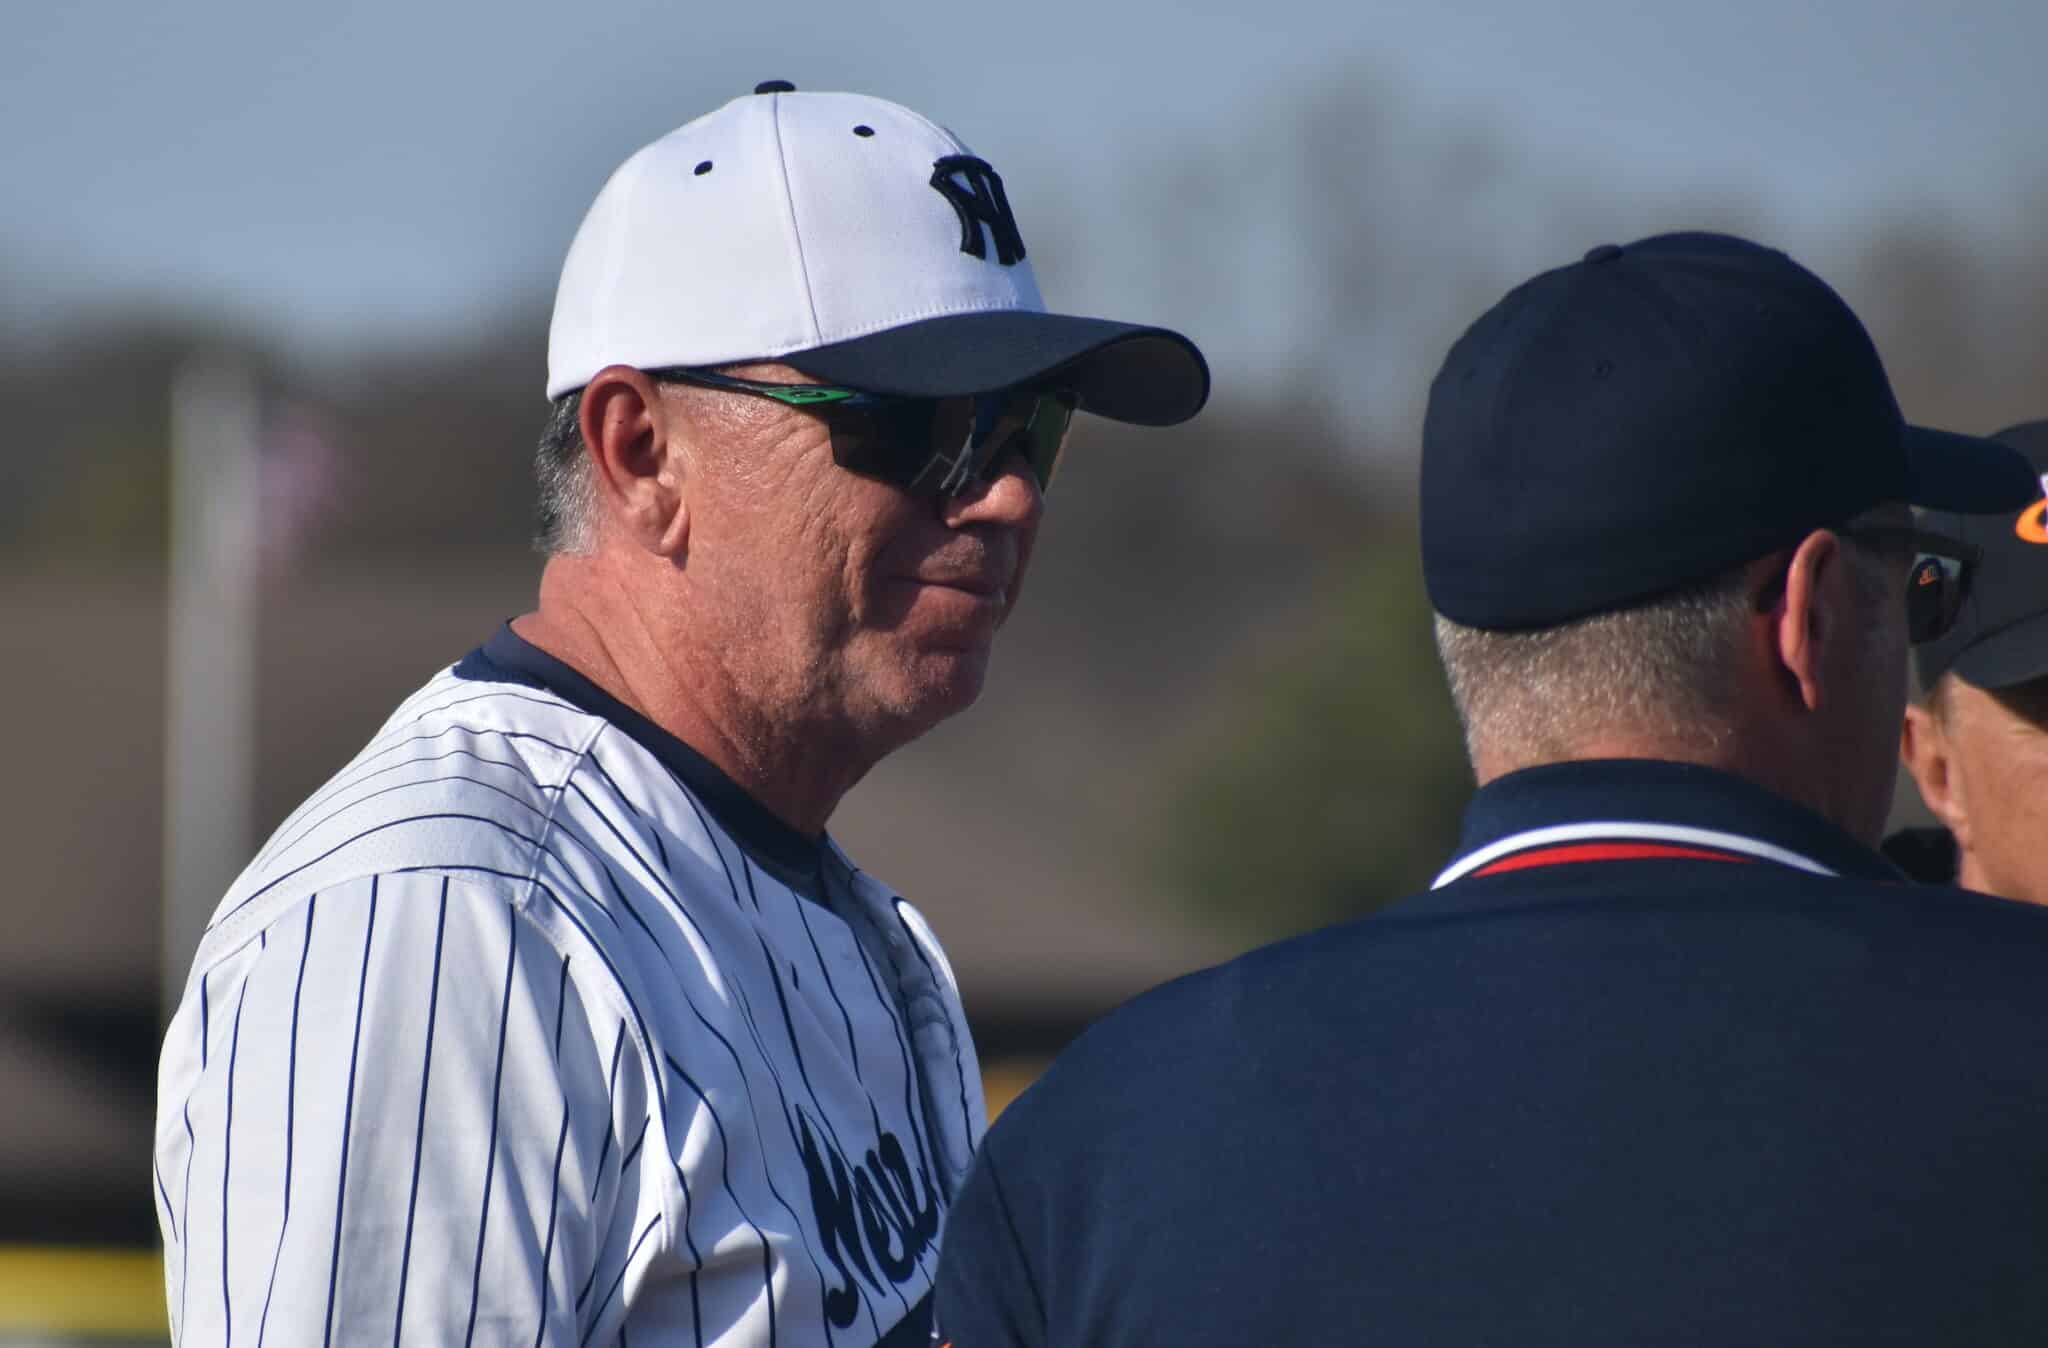 New Trier's Naps becomes state's winningest high school baseball coach -  The Record